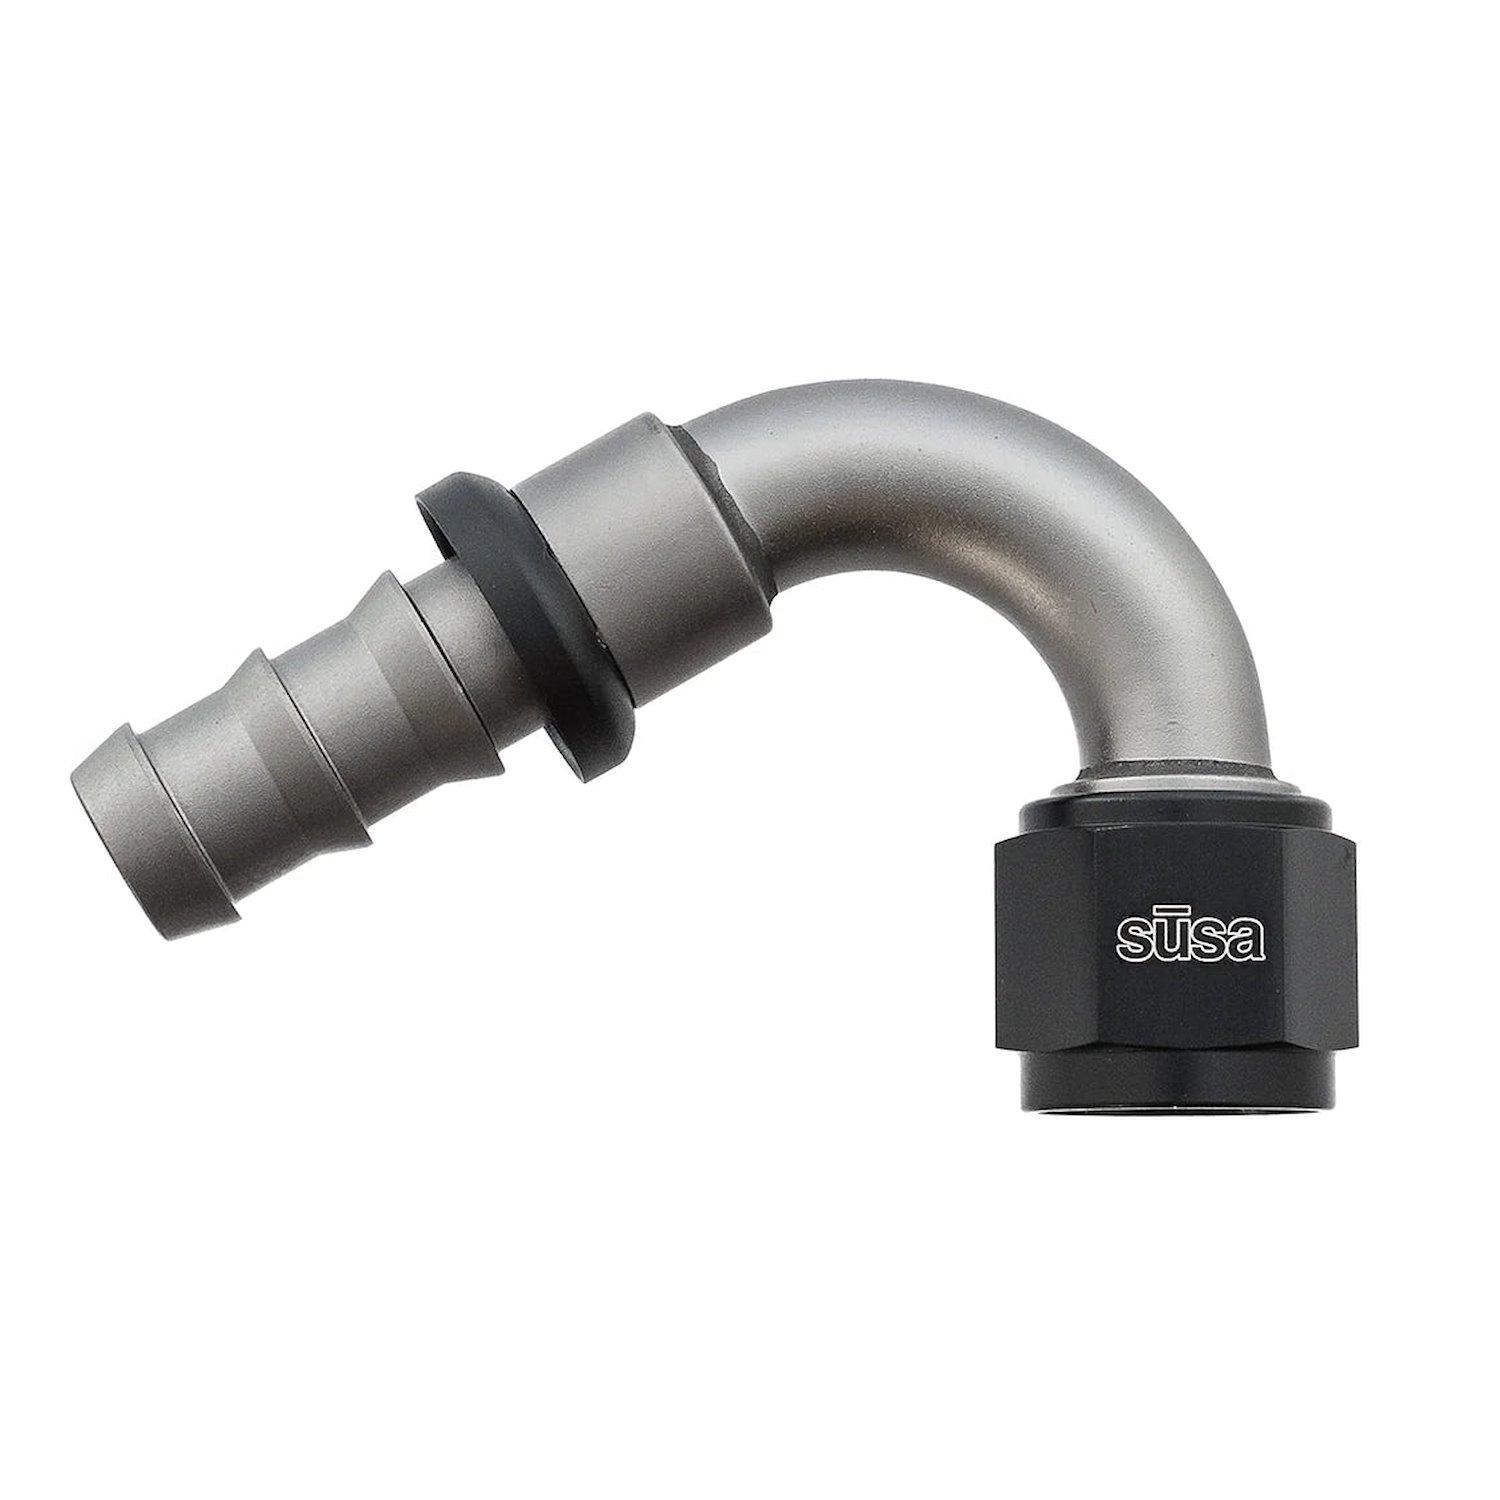 22-AN08PL08-120 Hose End, AN08 Female to -08 PushLock Male, 120-Degree